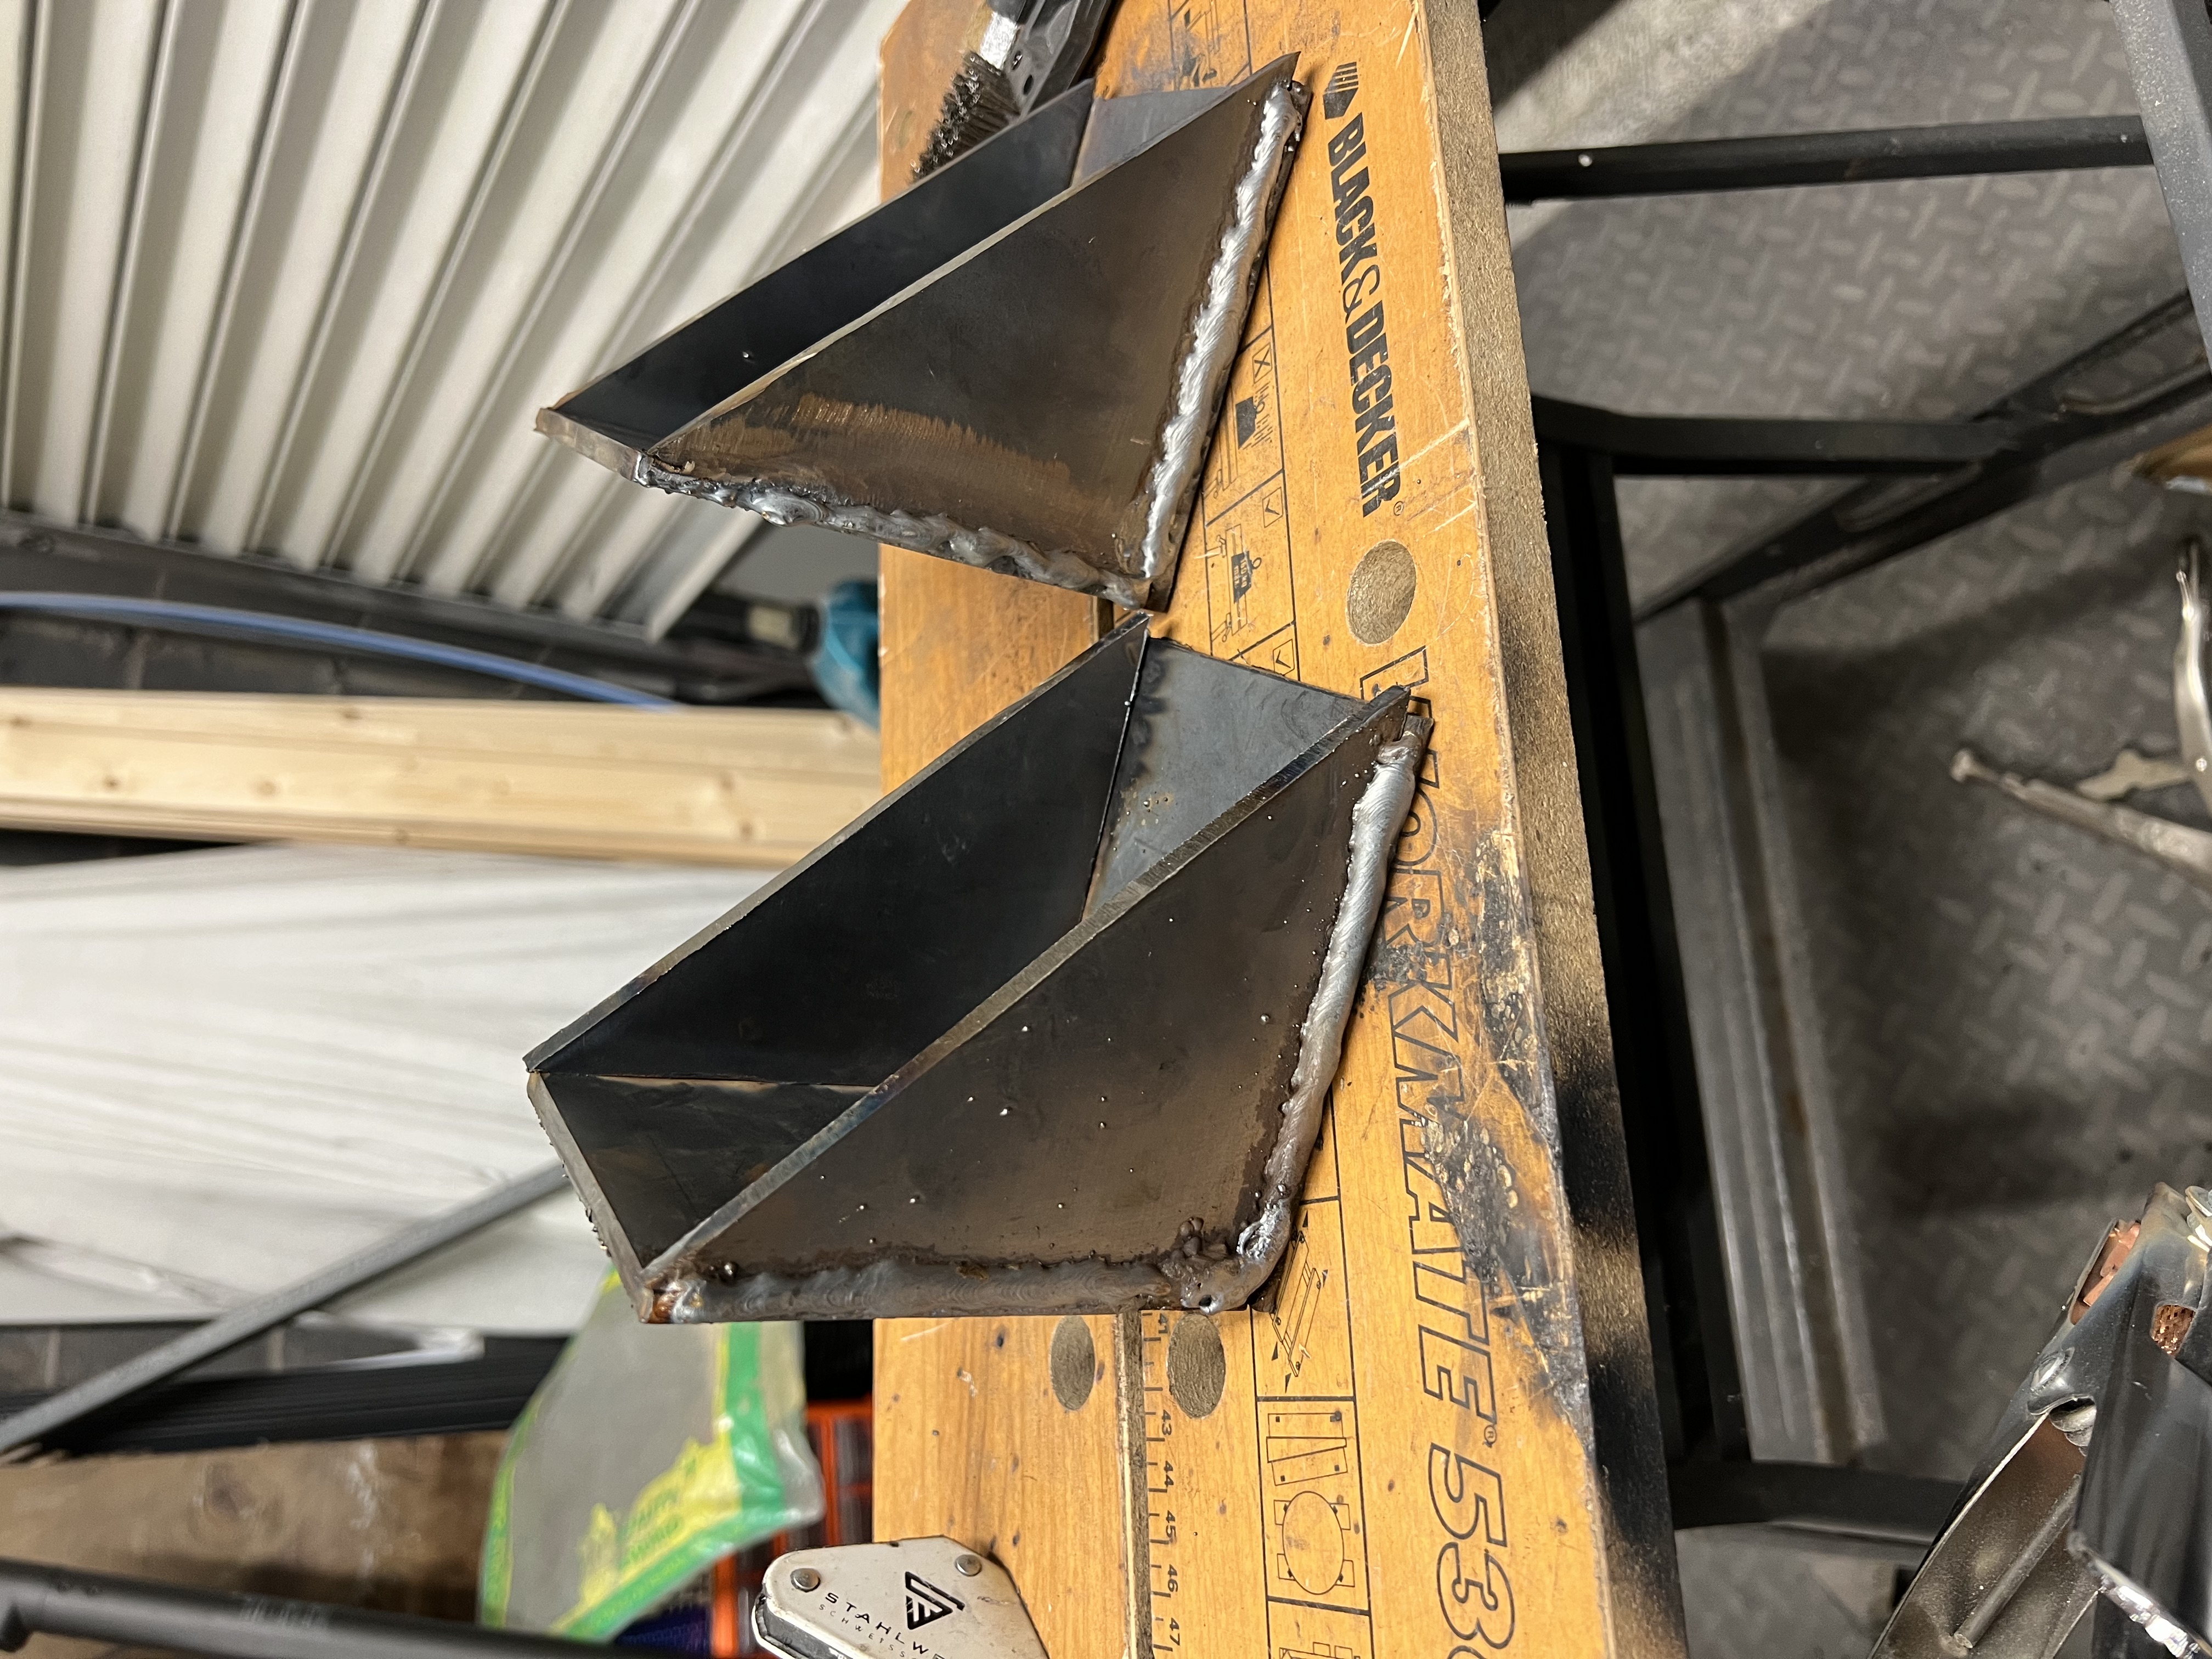 Pieces for upper mounting brackets (badly) welded together.